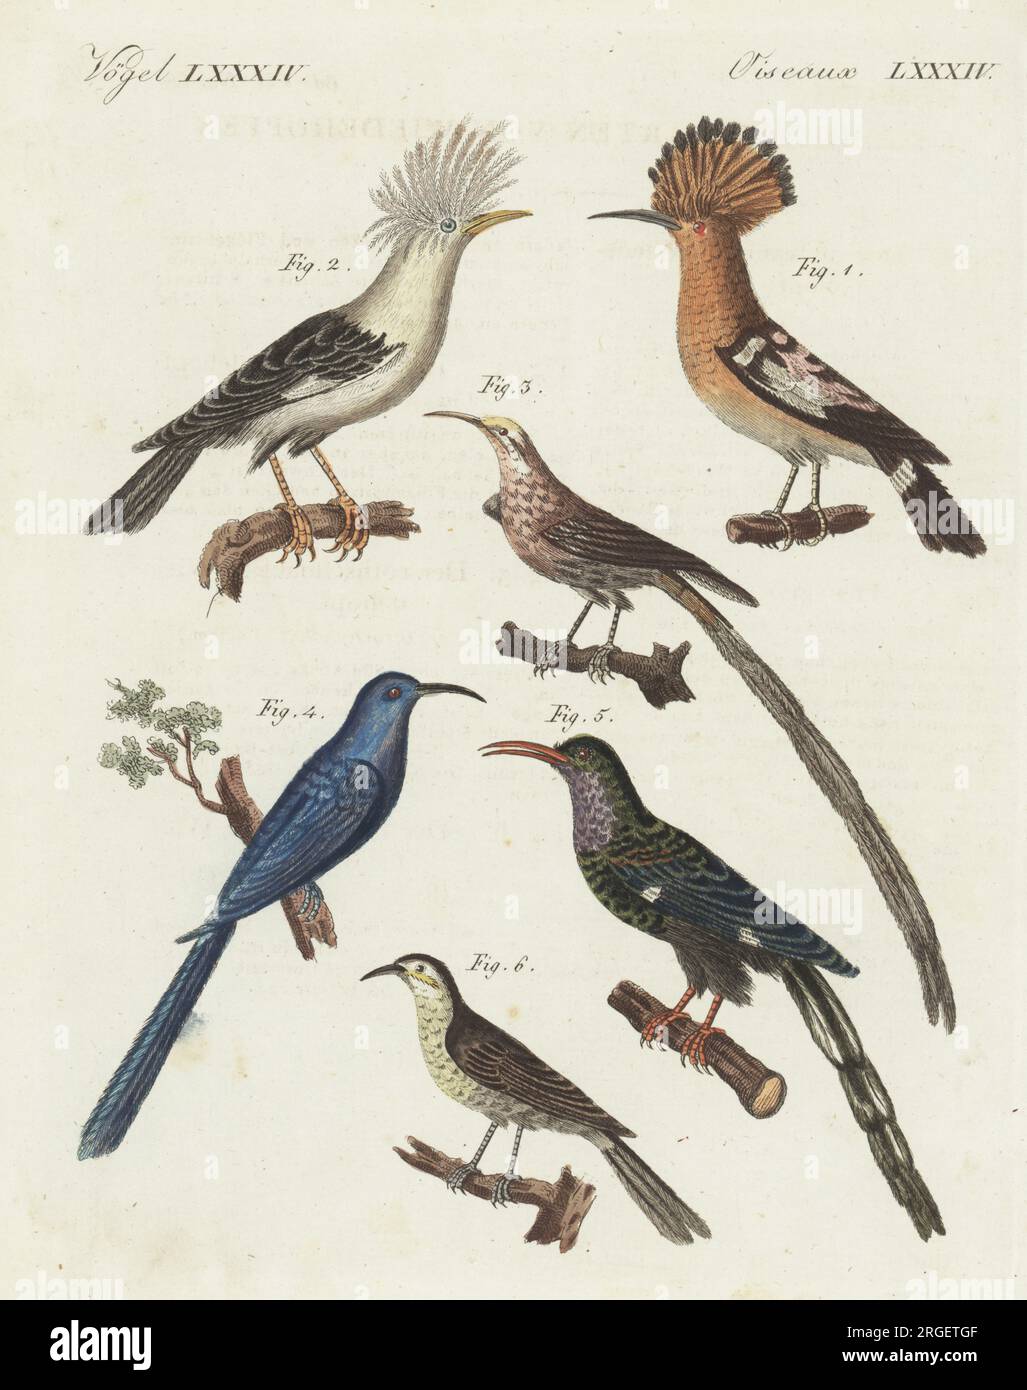 African hoopoe, Upupa africana 1, extinct hoopoe starling, Fregilupus varius 2, Cape sugarbird, Promerops cafer 3, Eurasian hoopoe, Upupa epops orientalis 4, green wood hoopoe, Phoeniculus purpureus 5, and unknown species, Upupa olivacea 6. Handcoloured copperplate engraving from Carl Bertuch's Bilderbuch fur Kinder (Picture Book for Children), Weimar, 1810. A 12-volume encyclopedia for children illustrated with almost 1,200 engraved plates on natural history, science, costume, mythology, etc., published from 1790-1830. Stock Photo